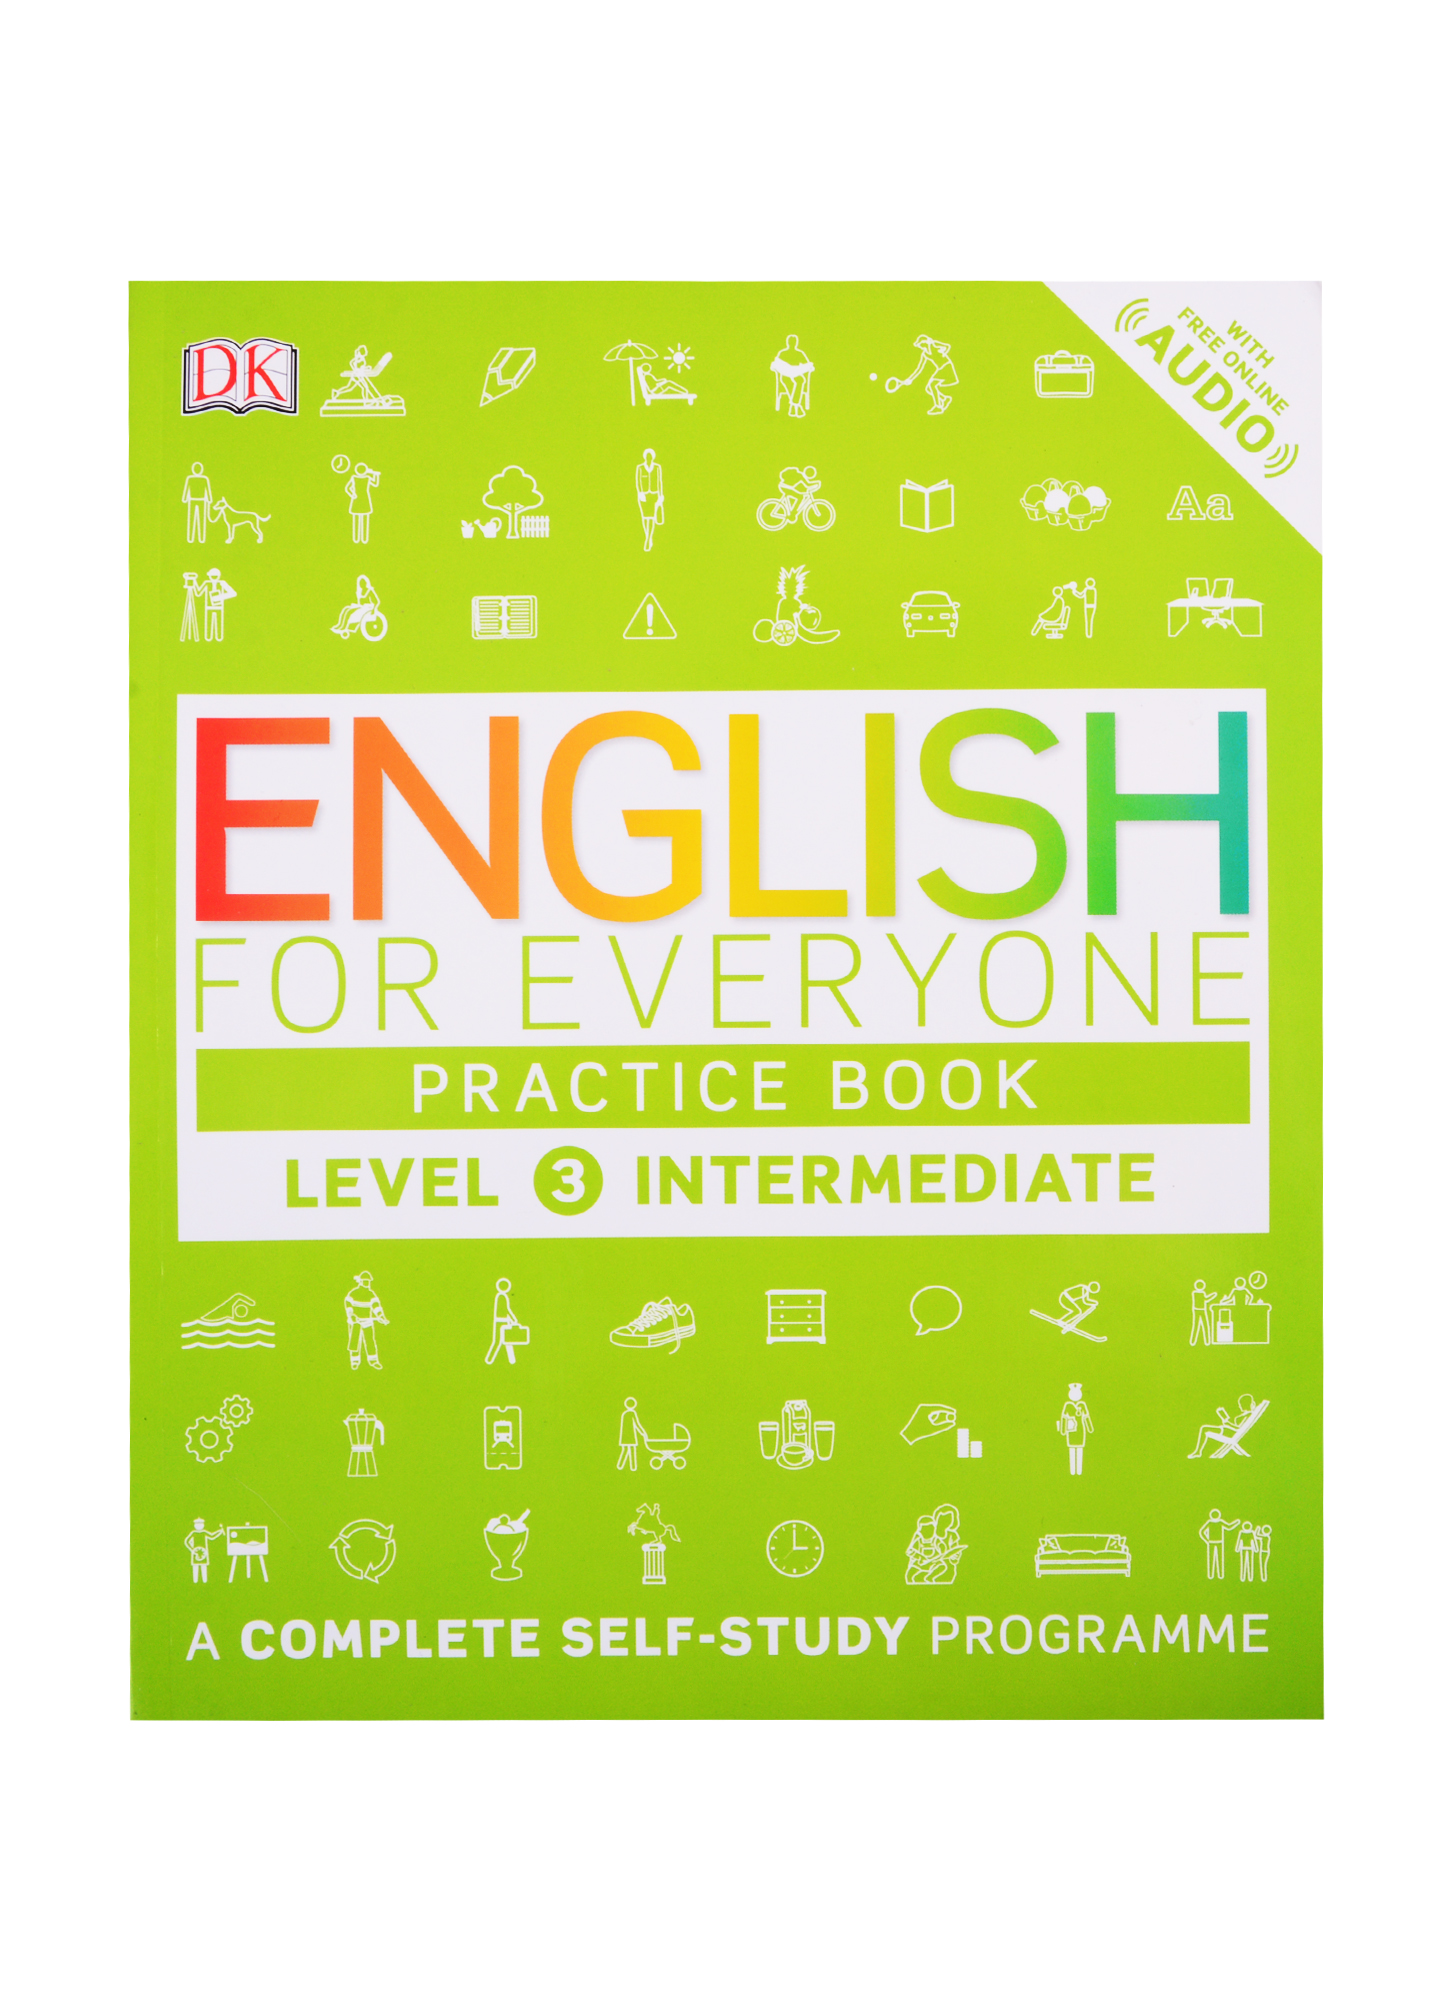 English for Everyone Practice Book Level 3 Intermediate english for everyone course book level 4 advanced a complete self study programme